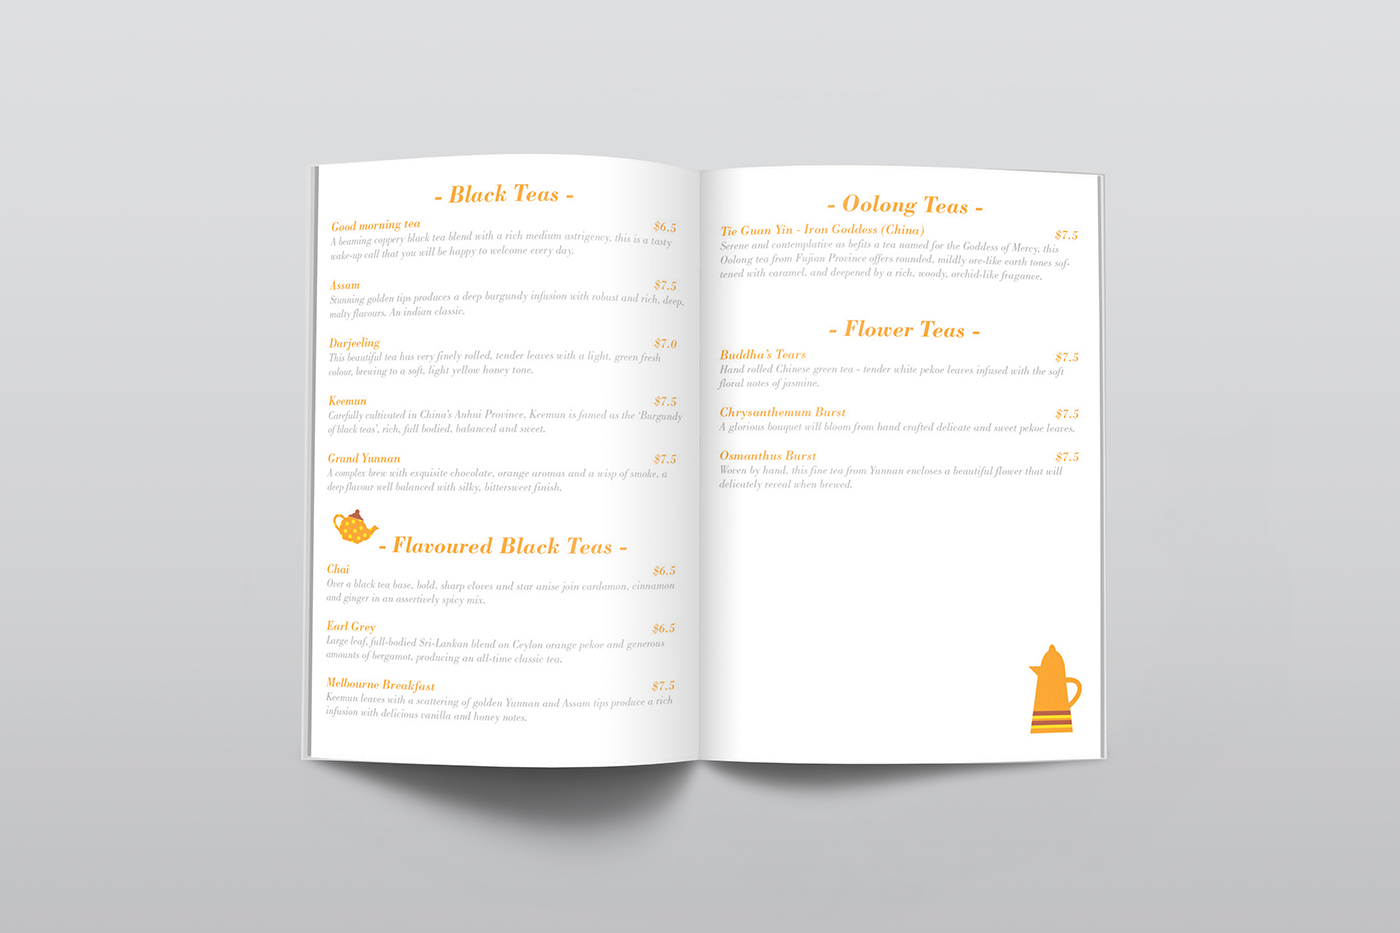 menu restaurant saffron tea house worldwide pages Layout InDesign Coffee cafe cakes cookies plates dishes Australia